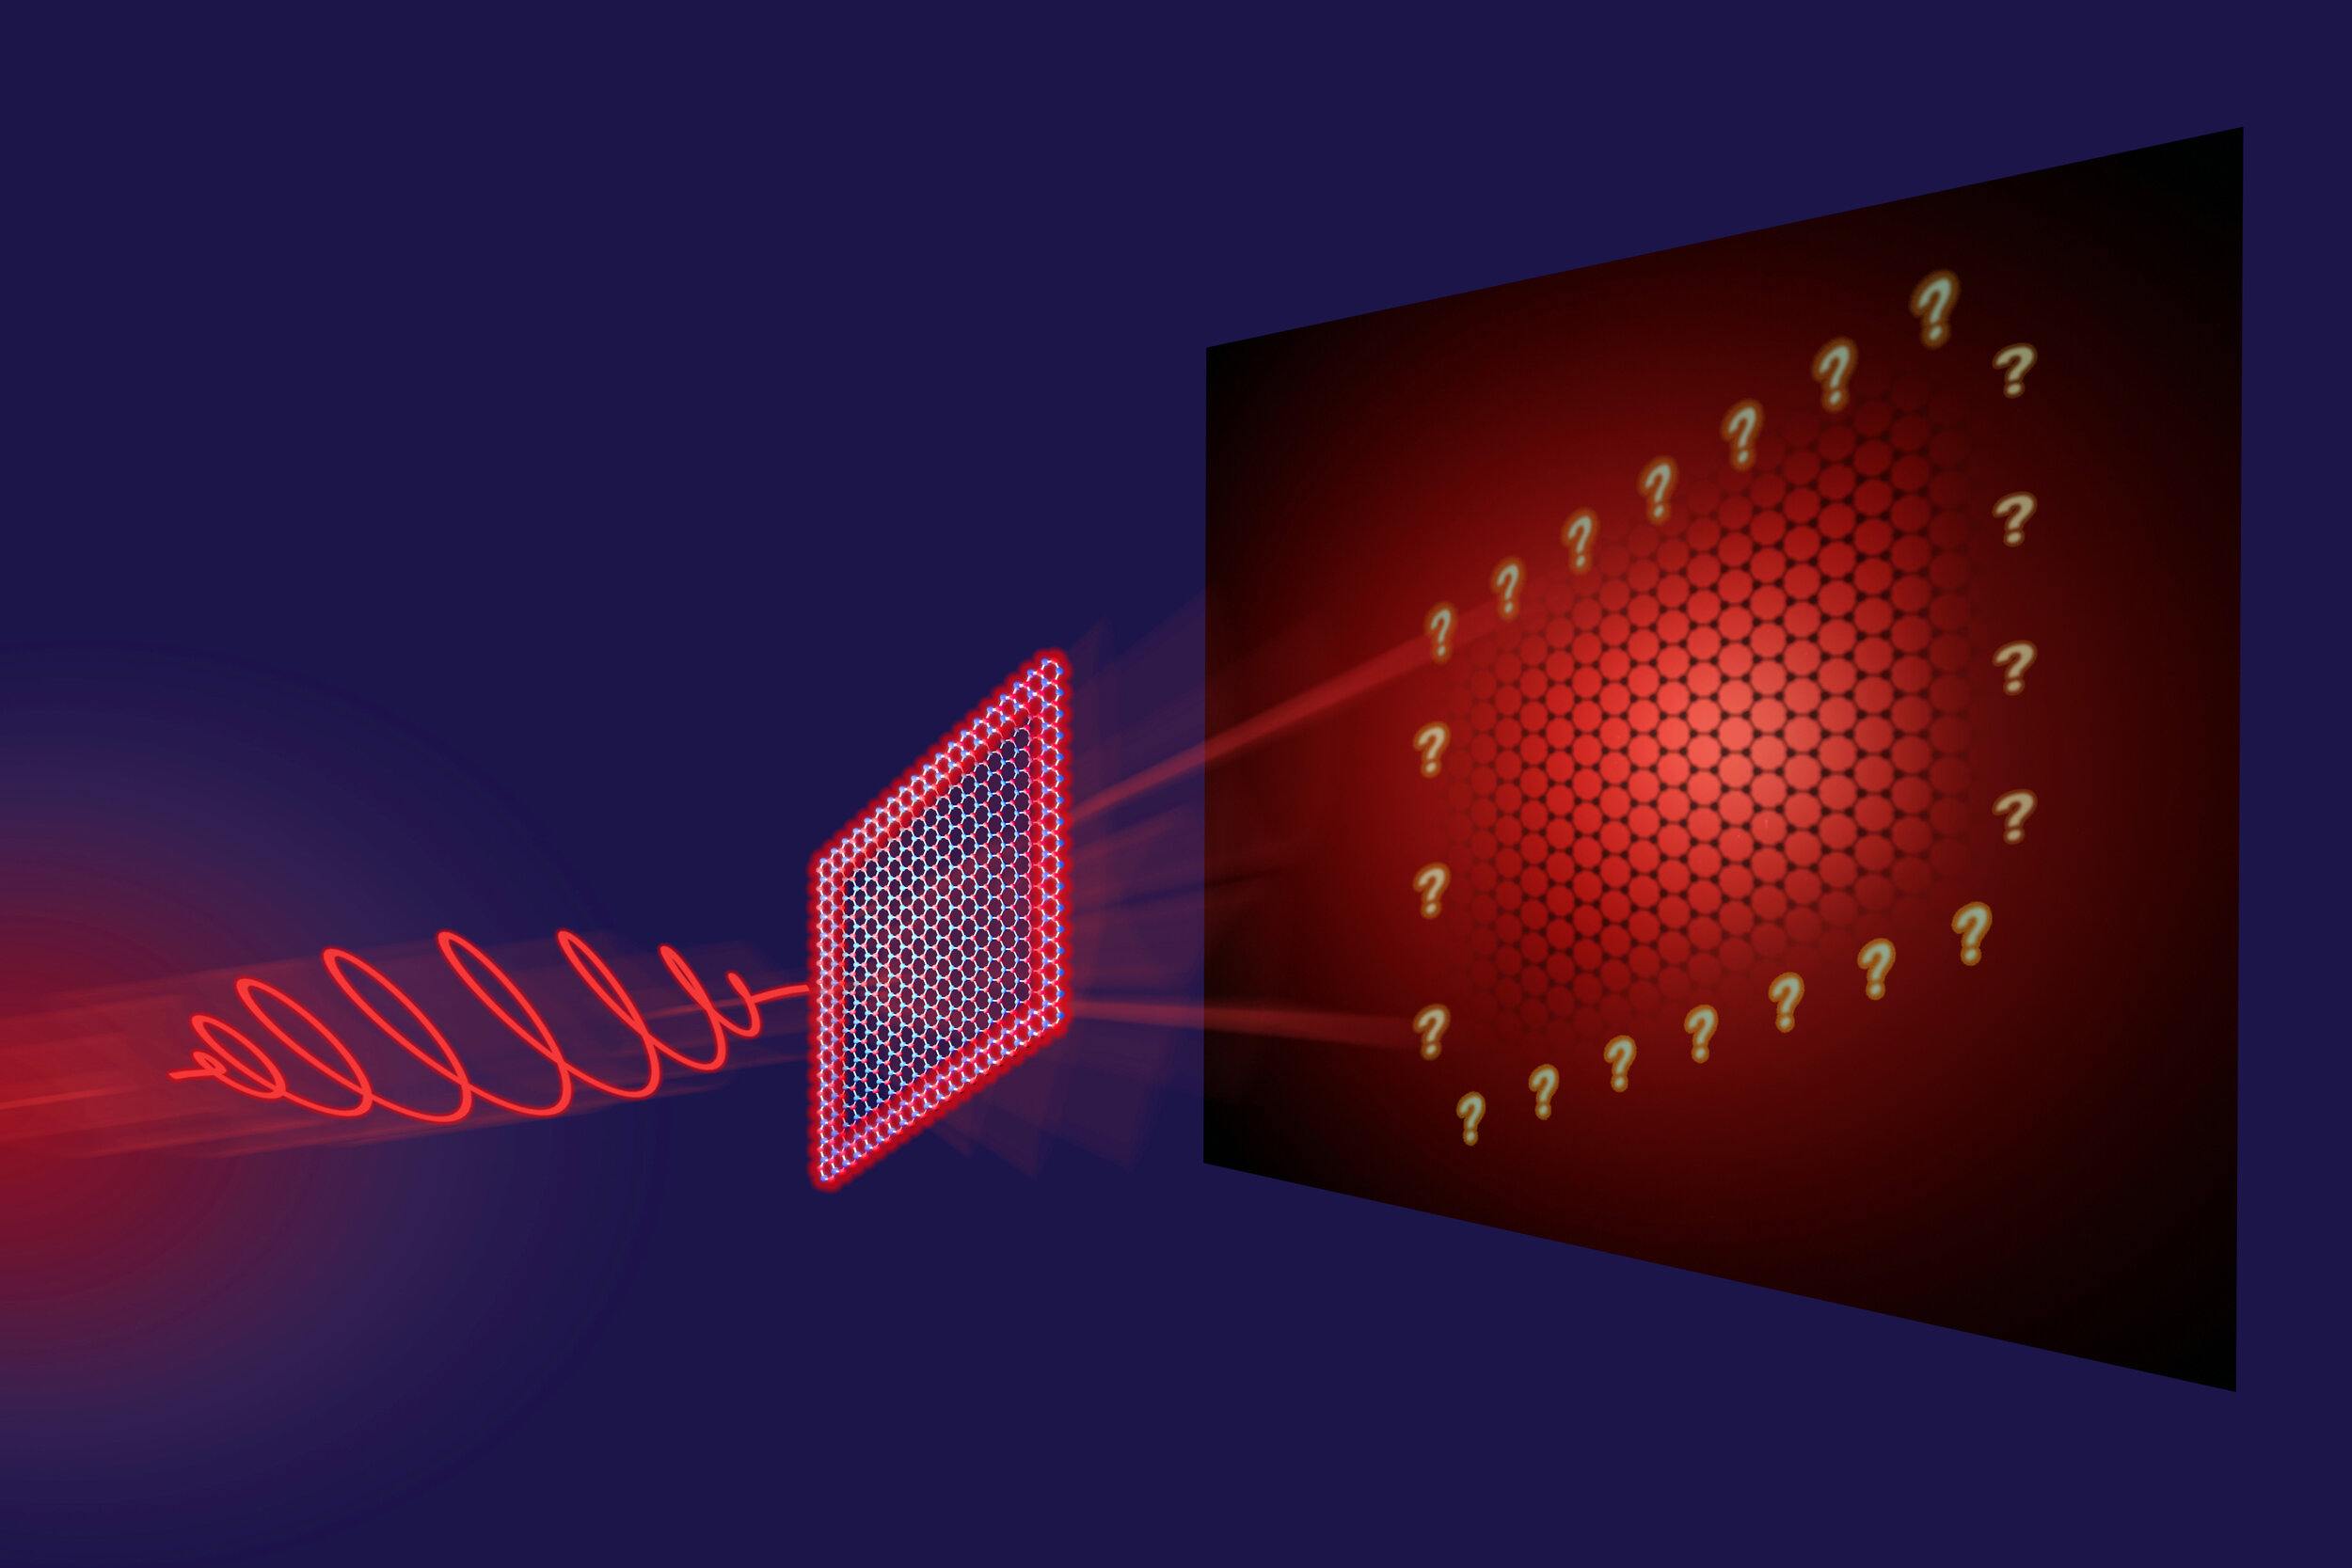 Research Reveals Absence of Universal Topological Signatures in High Harmonic Generation